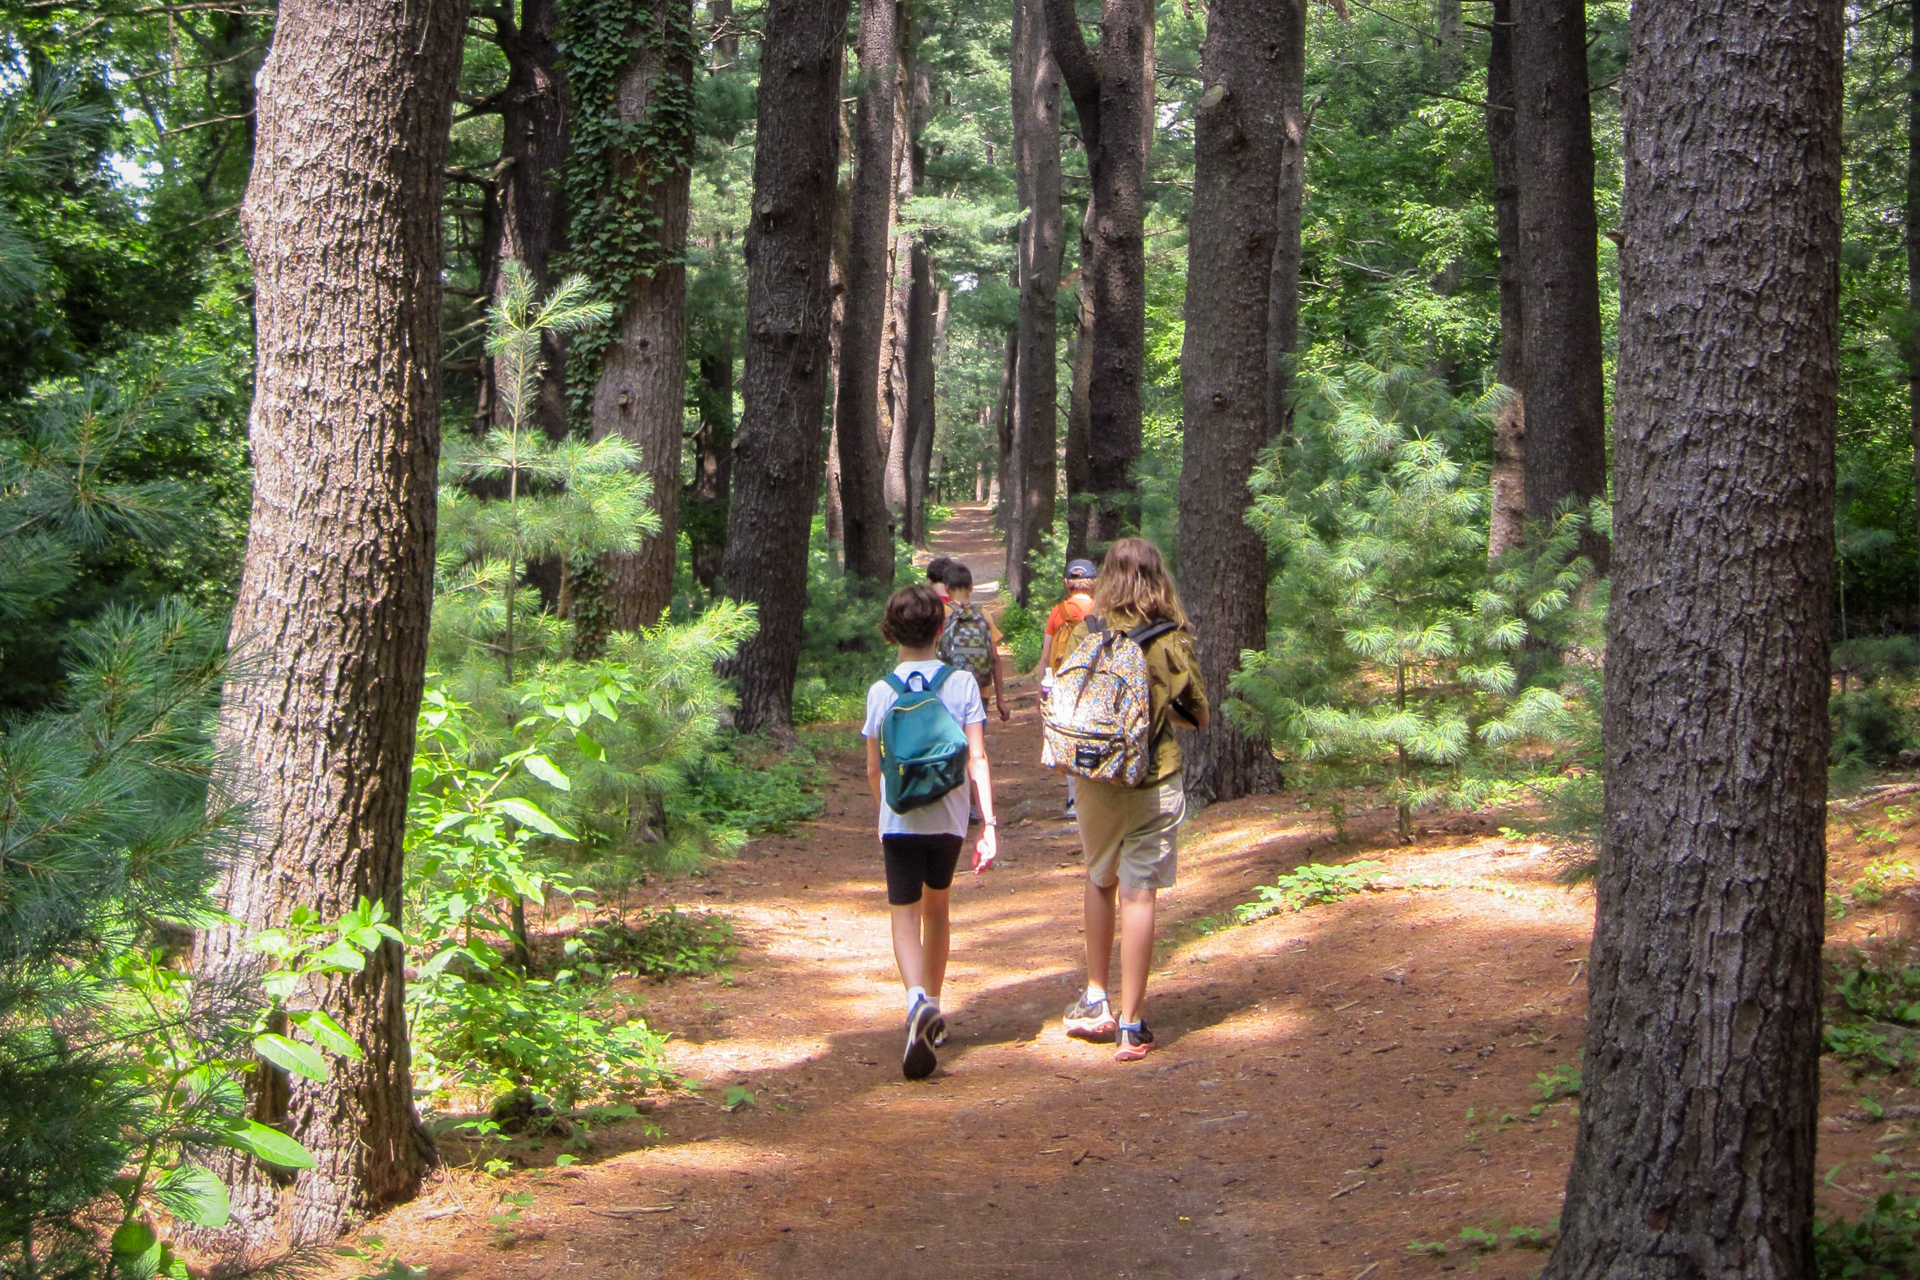 A group of older campers at Habitat Nature Camp hiking a trail through a pine forest on an all-day hike